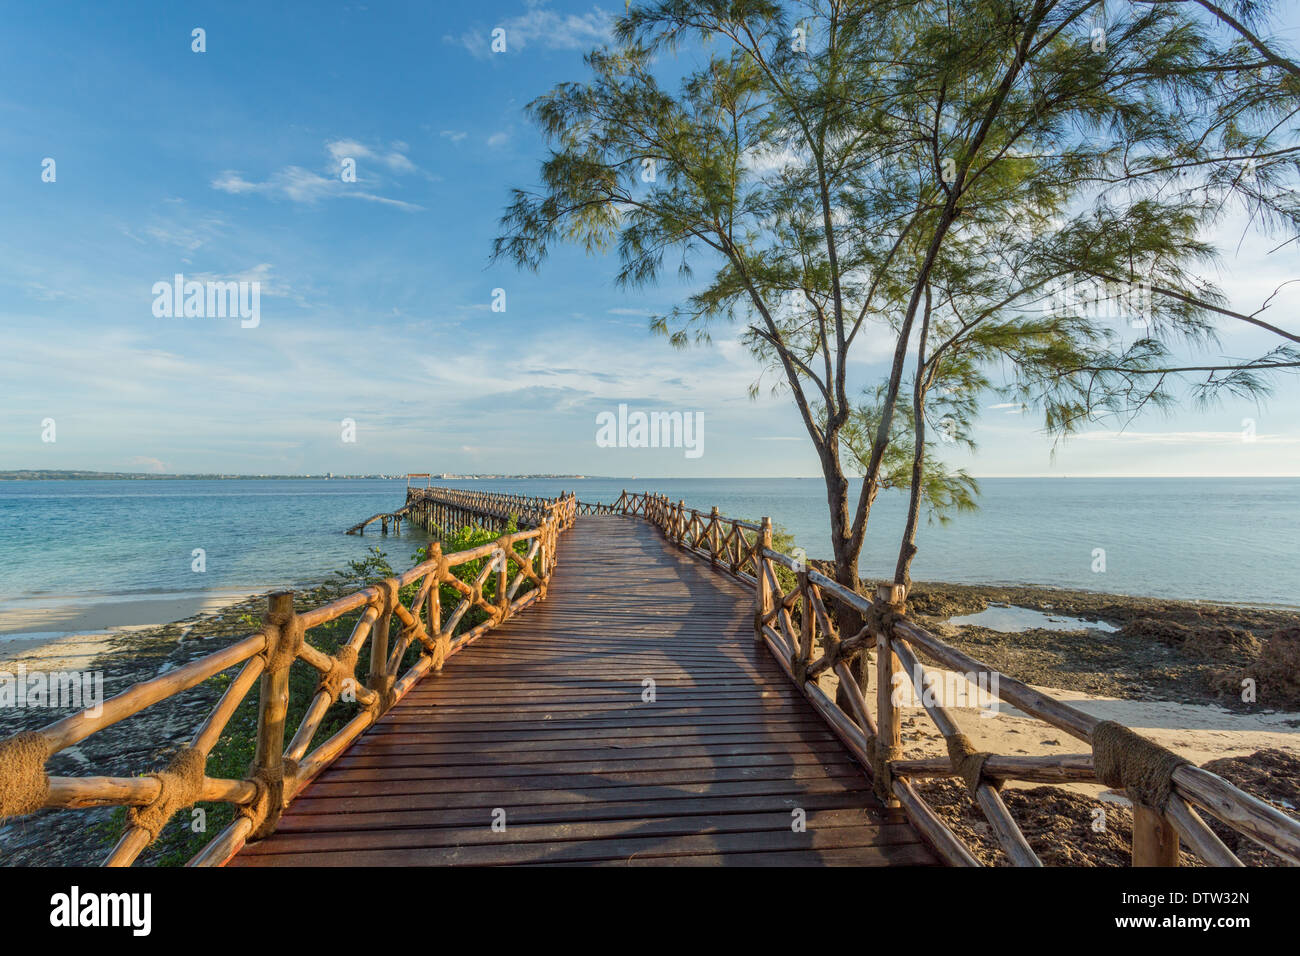 An old wooden pier on the Indian ocean built on the shores of Prison Island in Zanzibar, Tanzania Stock Photo